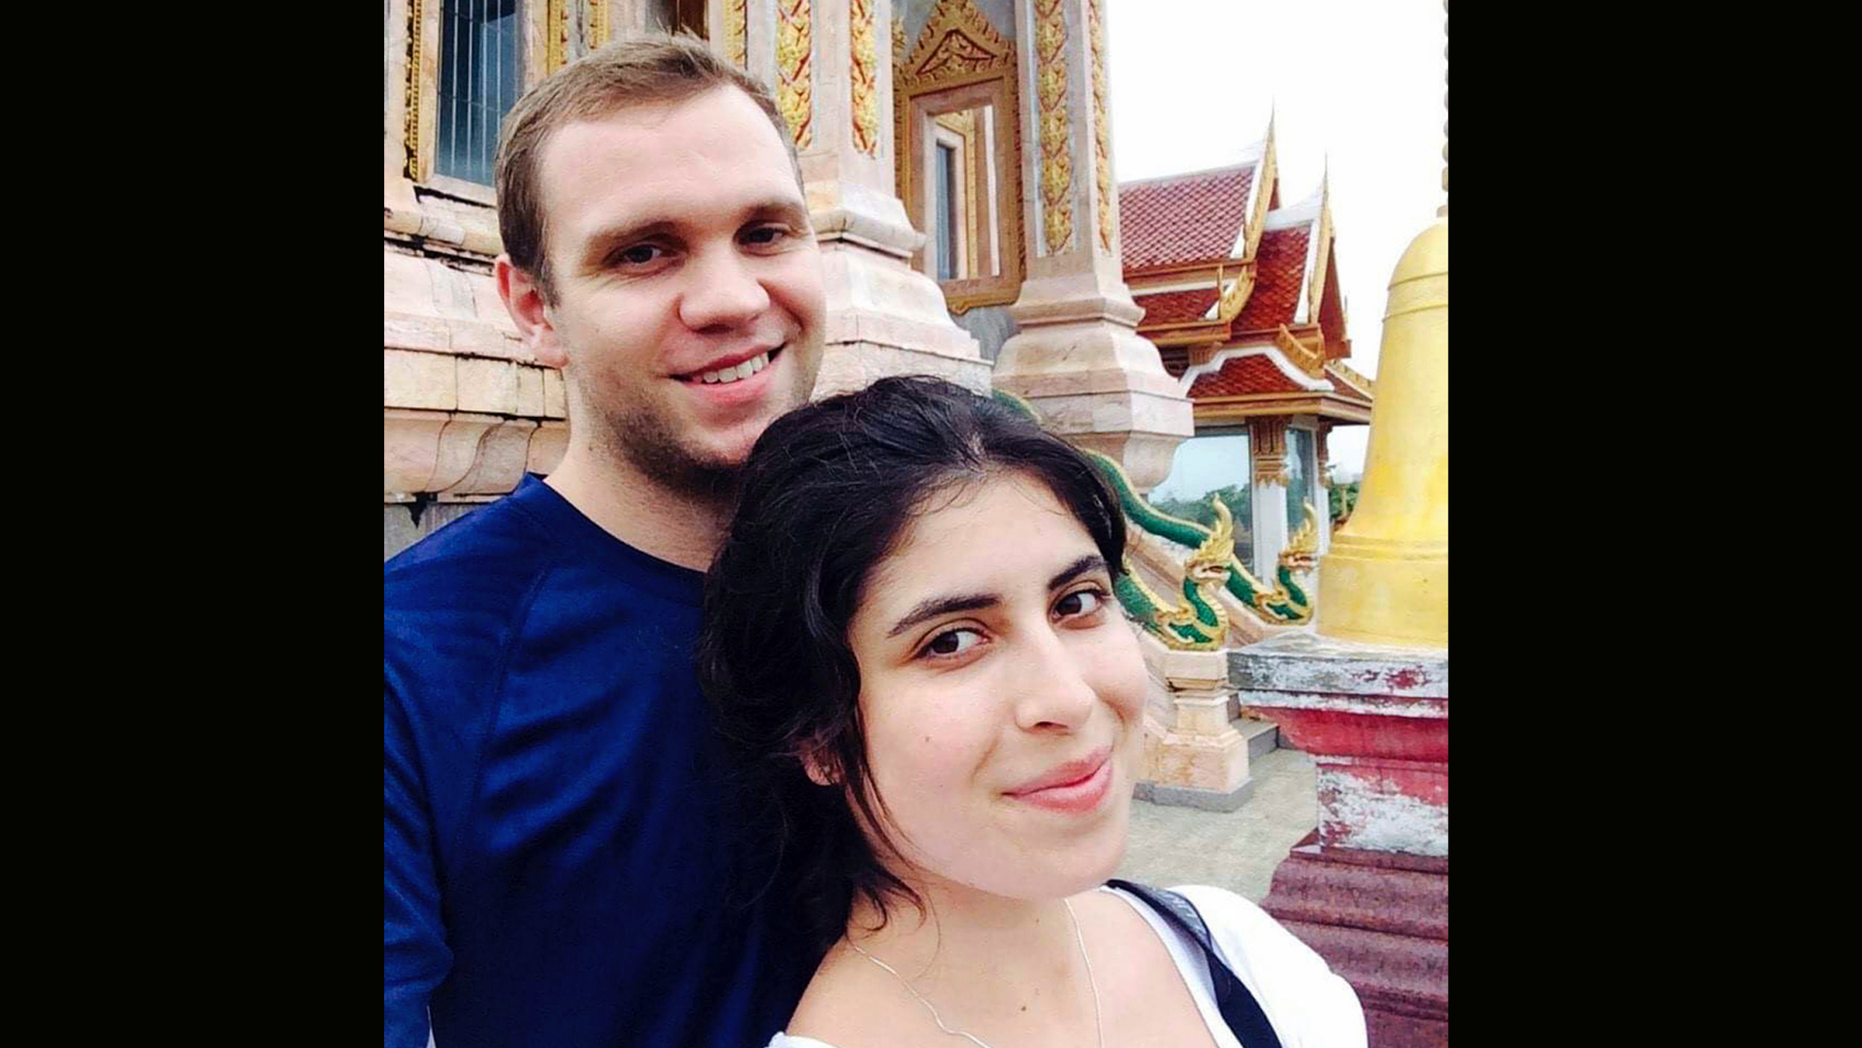 This undated family photo shows Matthew Hedges with his wife Daniela Tejada. The family of a British academic imprisoned in the United Arab Emirates for alleged espionage was reportedly sentenced to life imprisonment. Matthew Hedges, Ph.D. student in Middle Eastern Studies at Durham University, 31, was arrested at Dubai Airport on May 5, 2018. Foreign Secretary Jeremy Hunt, expressed his shock at the verdict issued Wednesday, November 21, 2018. United Arab Emirates to make representations on his behalf. (Daniela Tejada via AP)